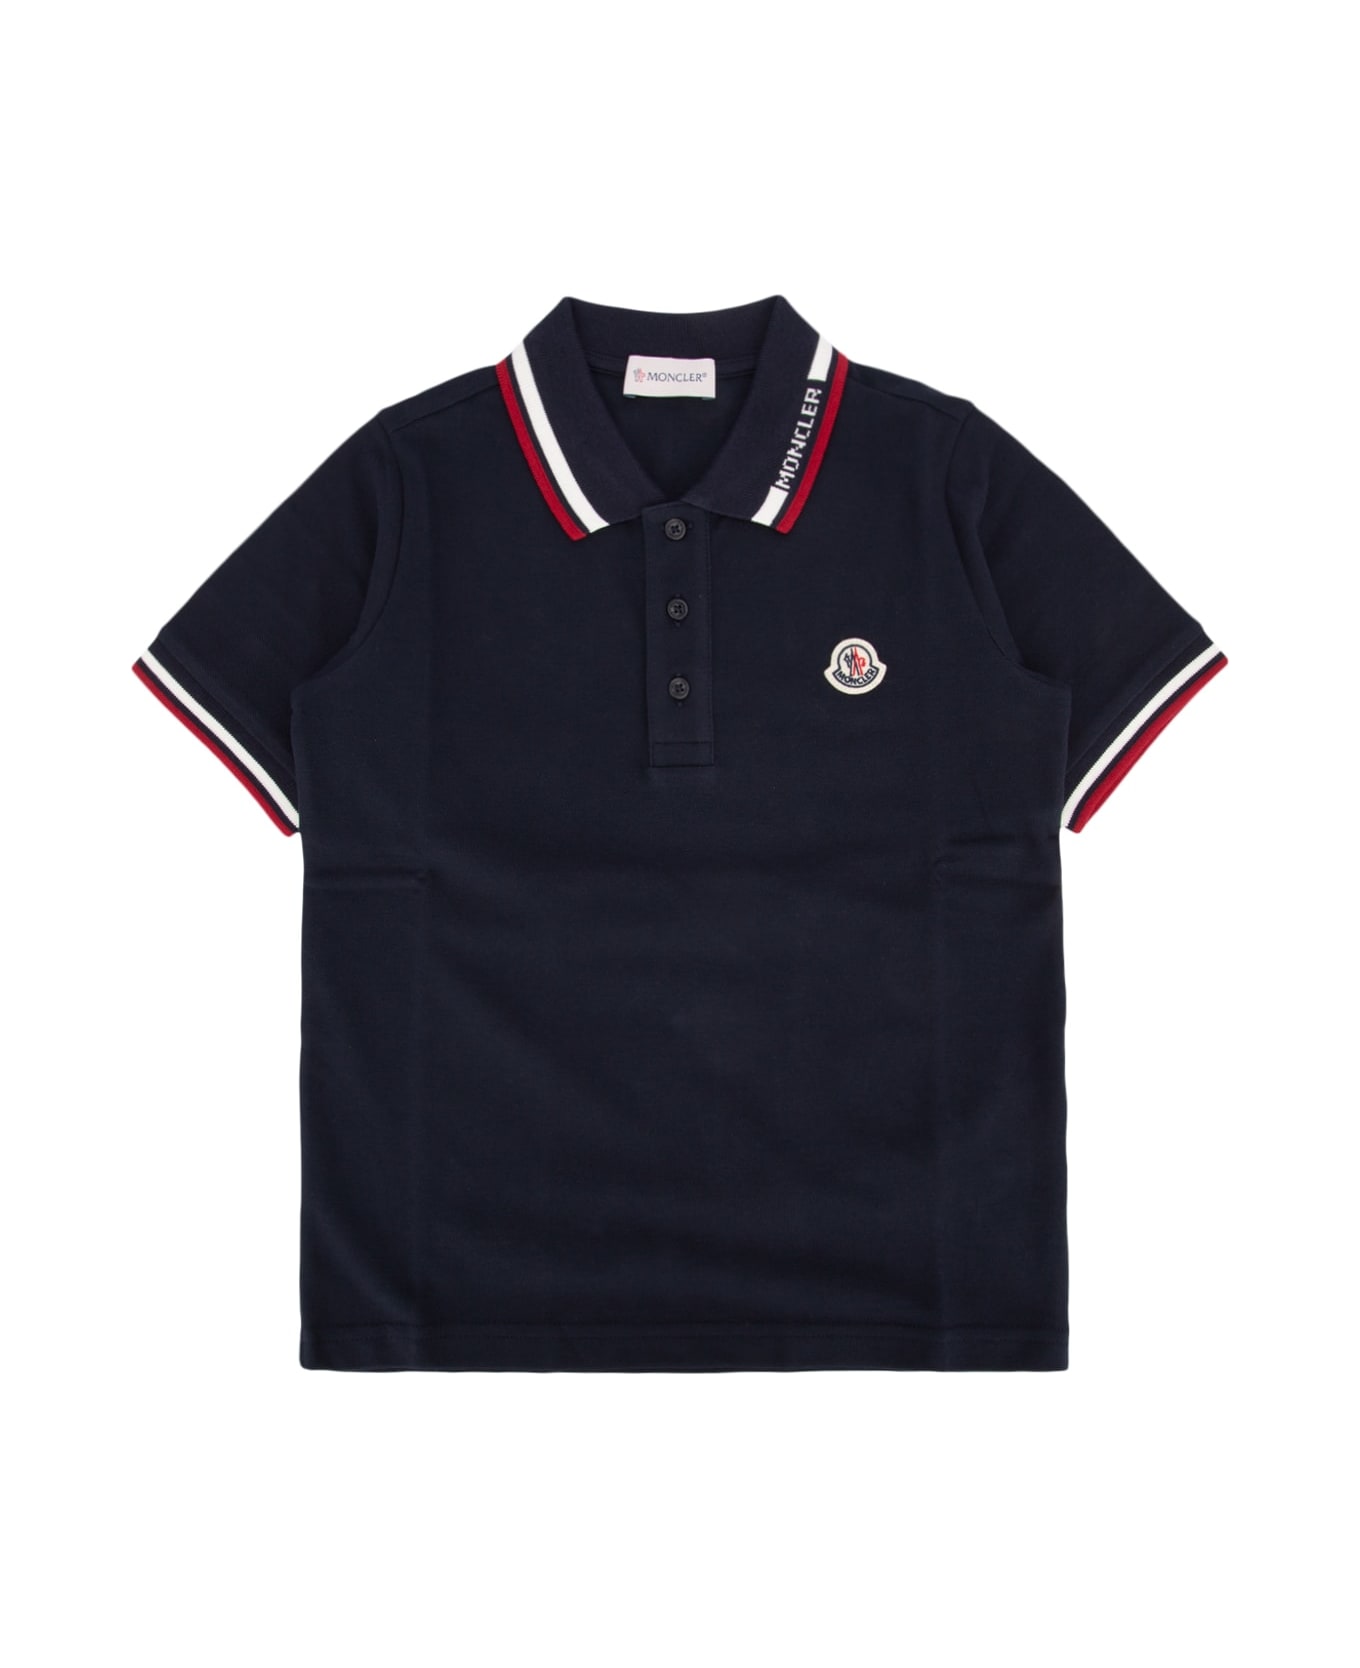 Moncler Polo - 778 Tシャツ＆ポロシャツ